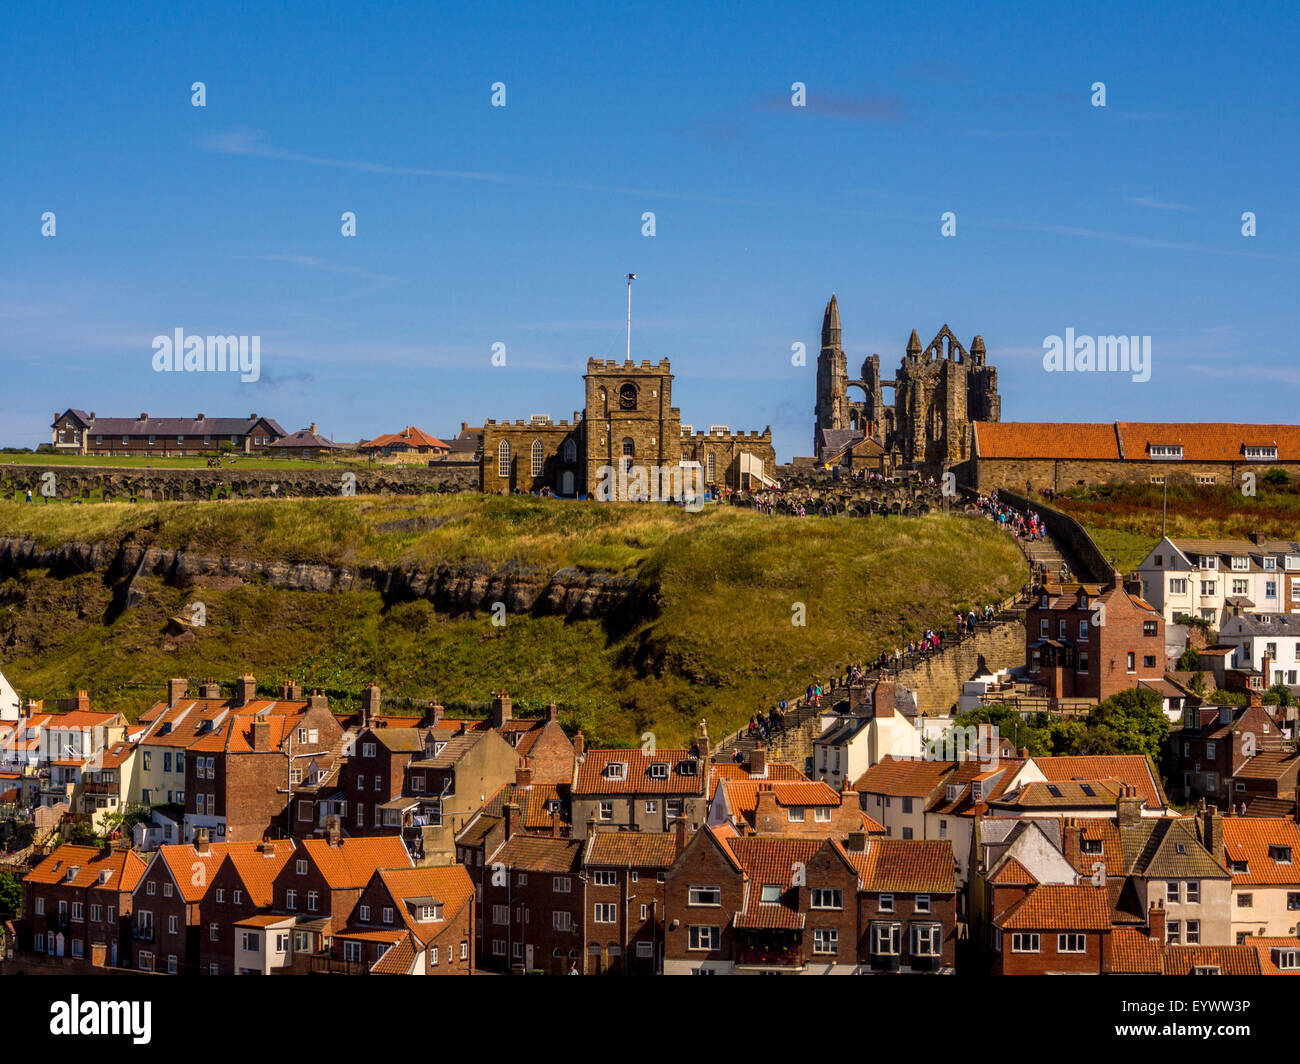 St Mary's Church and Whitby Abbey with riverside buildings in the foreground. Whitby, North Yorkshire St Mary The Virgin Stock Photo